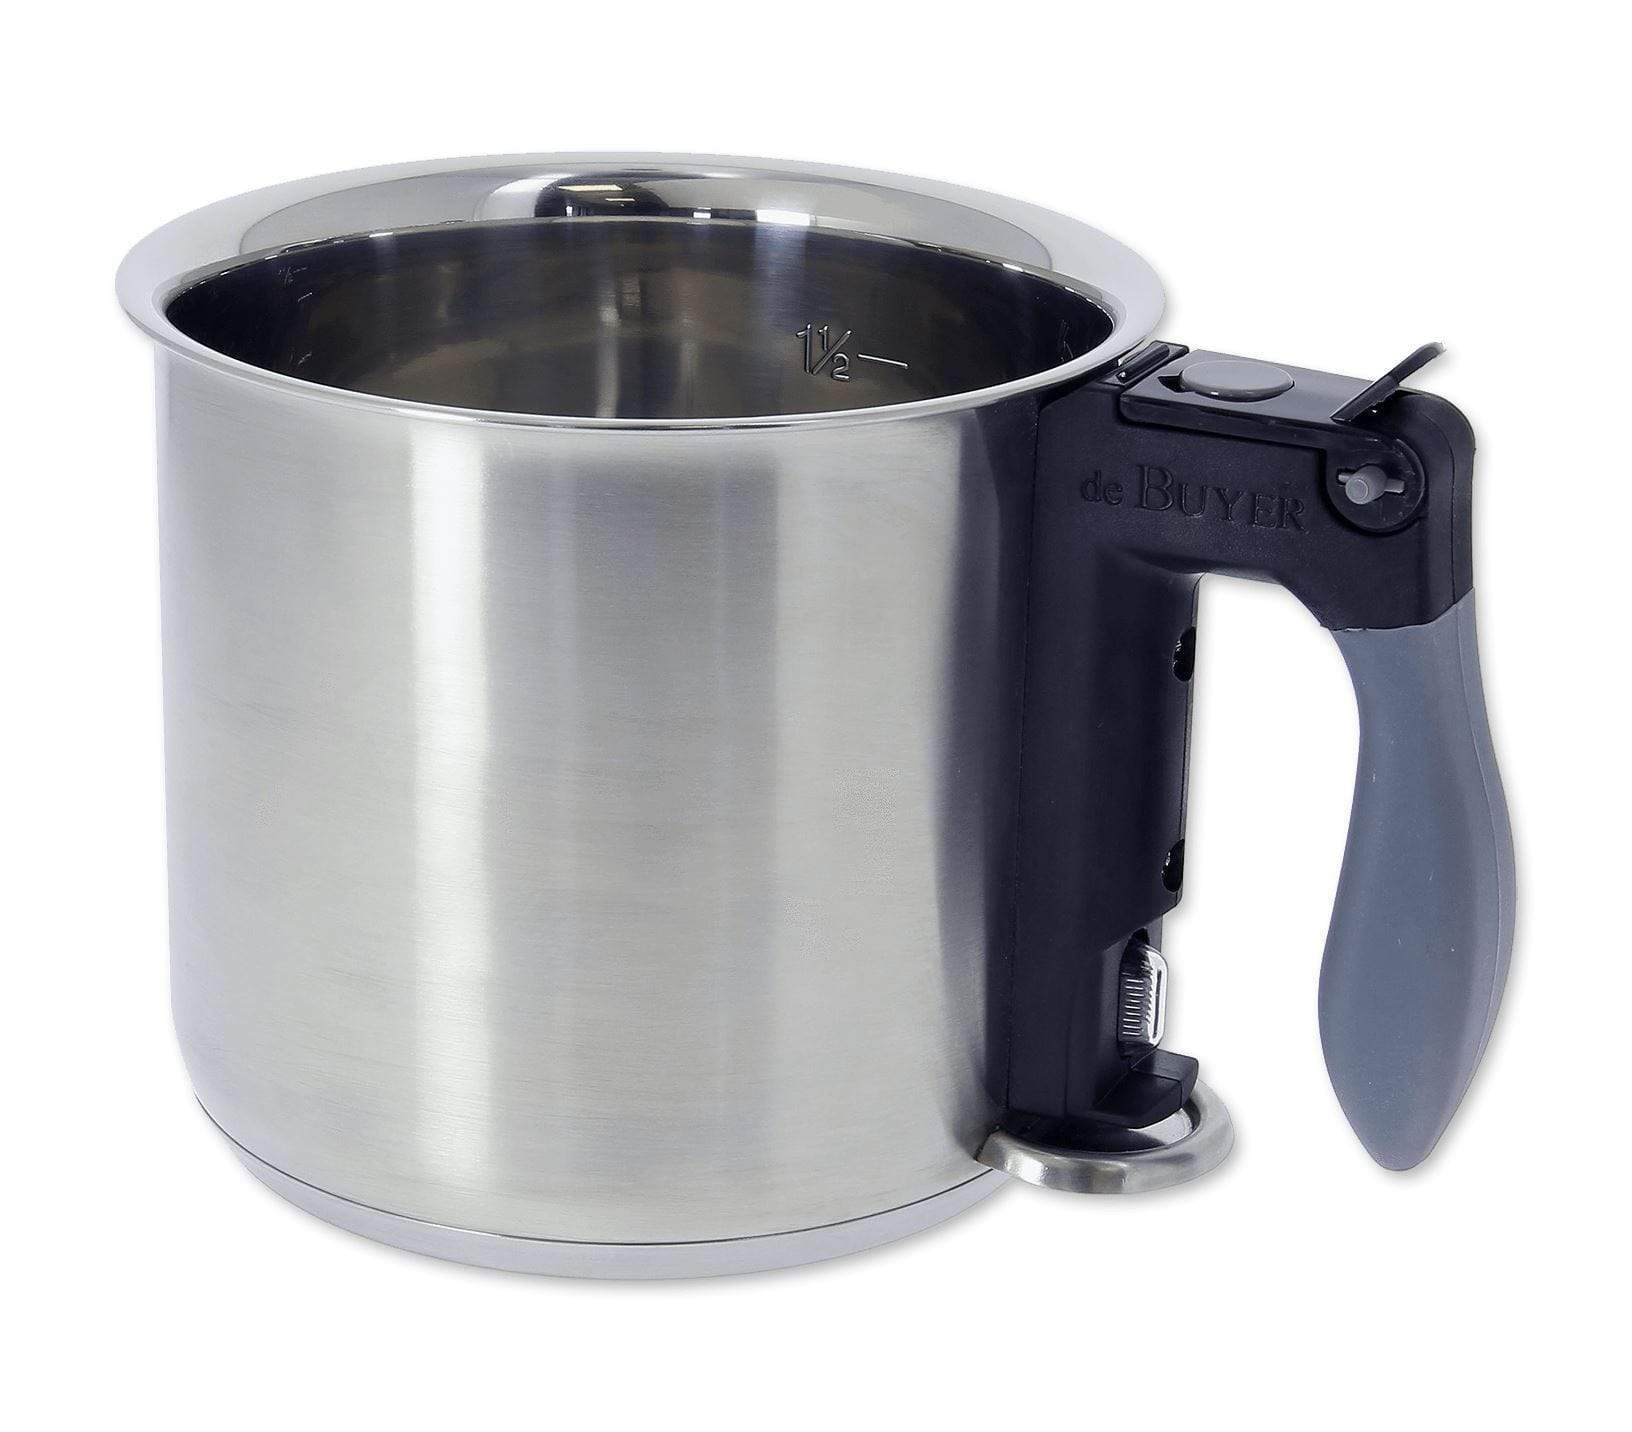 Food Grade Double Boiler Stainless Steel Body Keep Warm Function